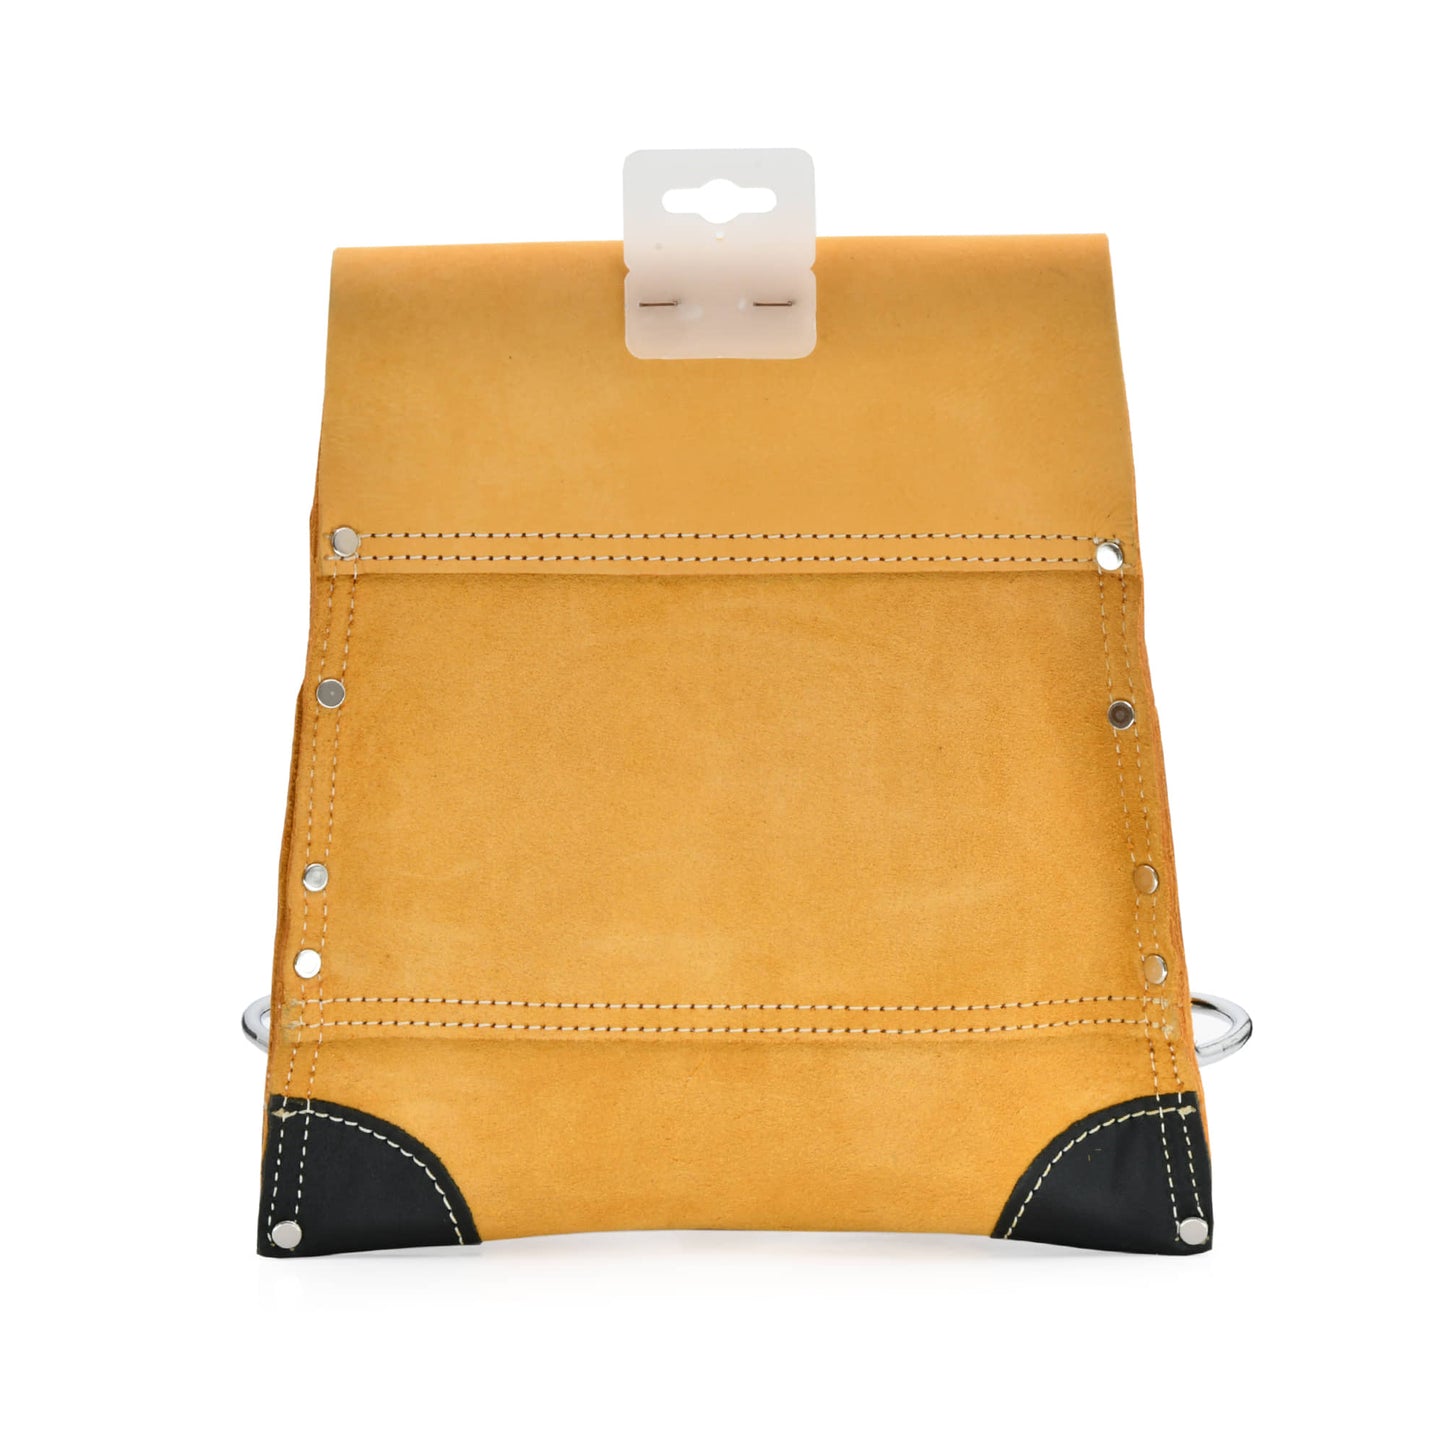 Style n Craft's 93823 - 8 Pocket Carpenter's Nail & Tool Pouch in Yellow Full Grain Leather with Reinforced Corners - Back View with Hanger Tag